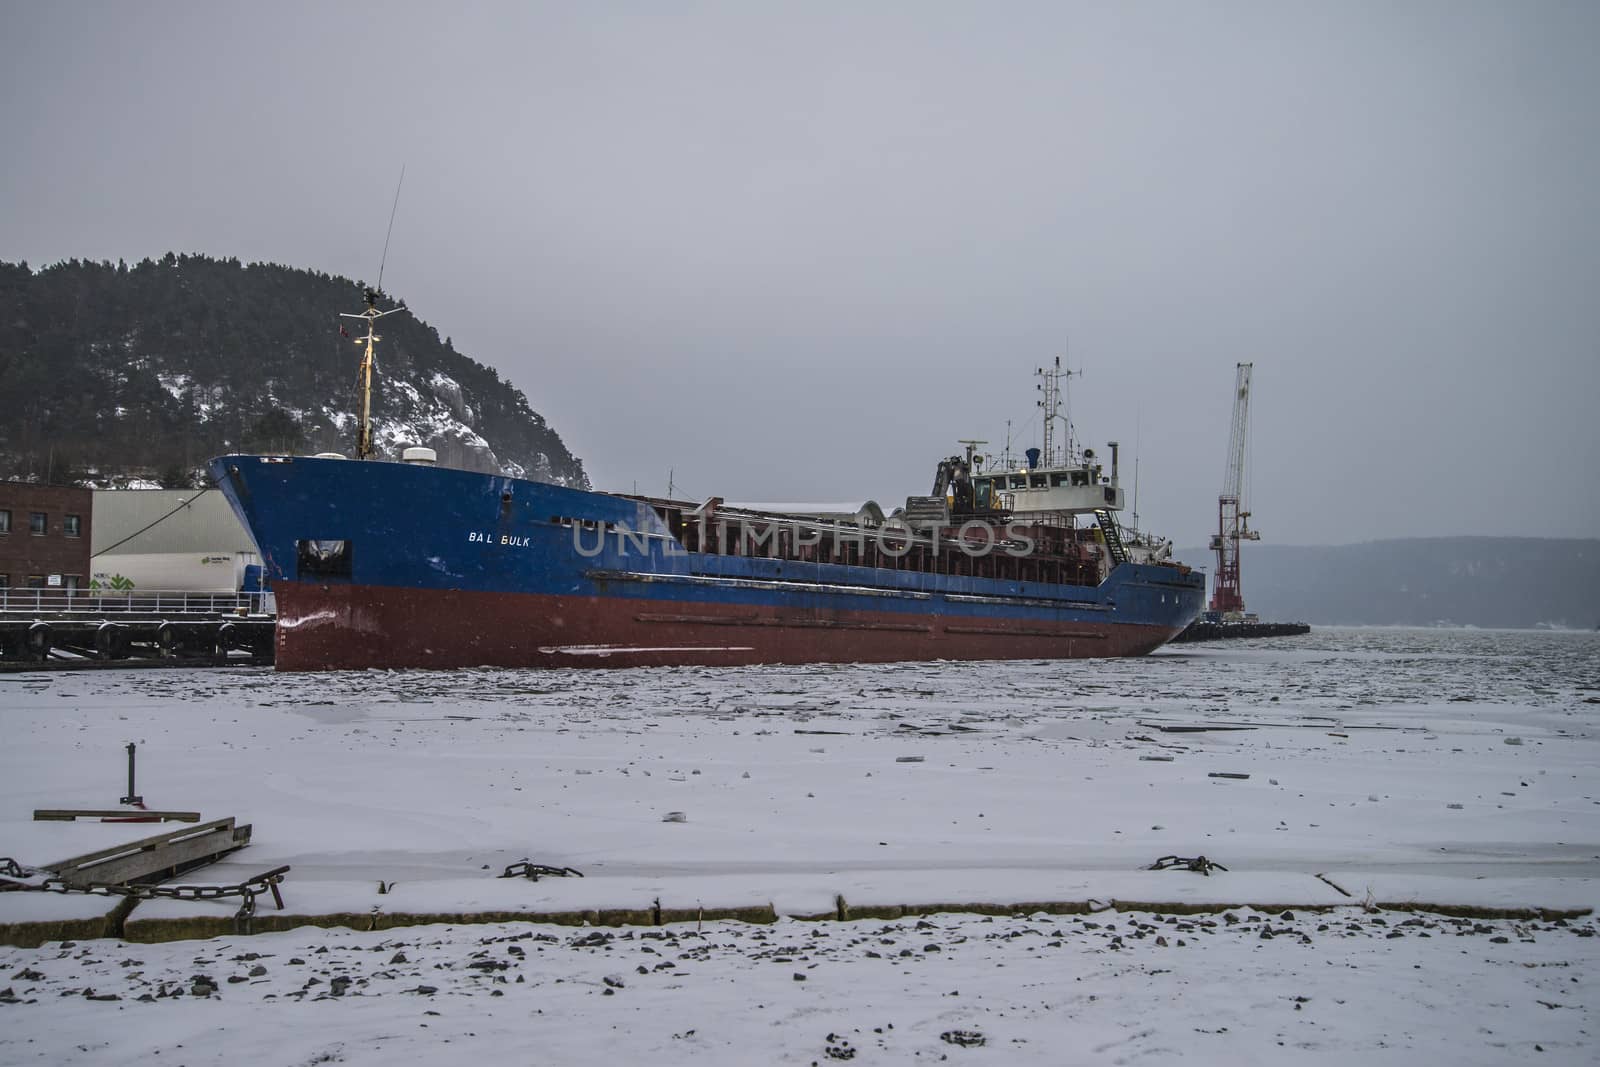 bal bulk moored to the quay at the port of Halden, in snowfall by steirus